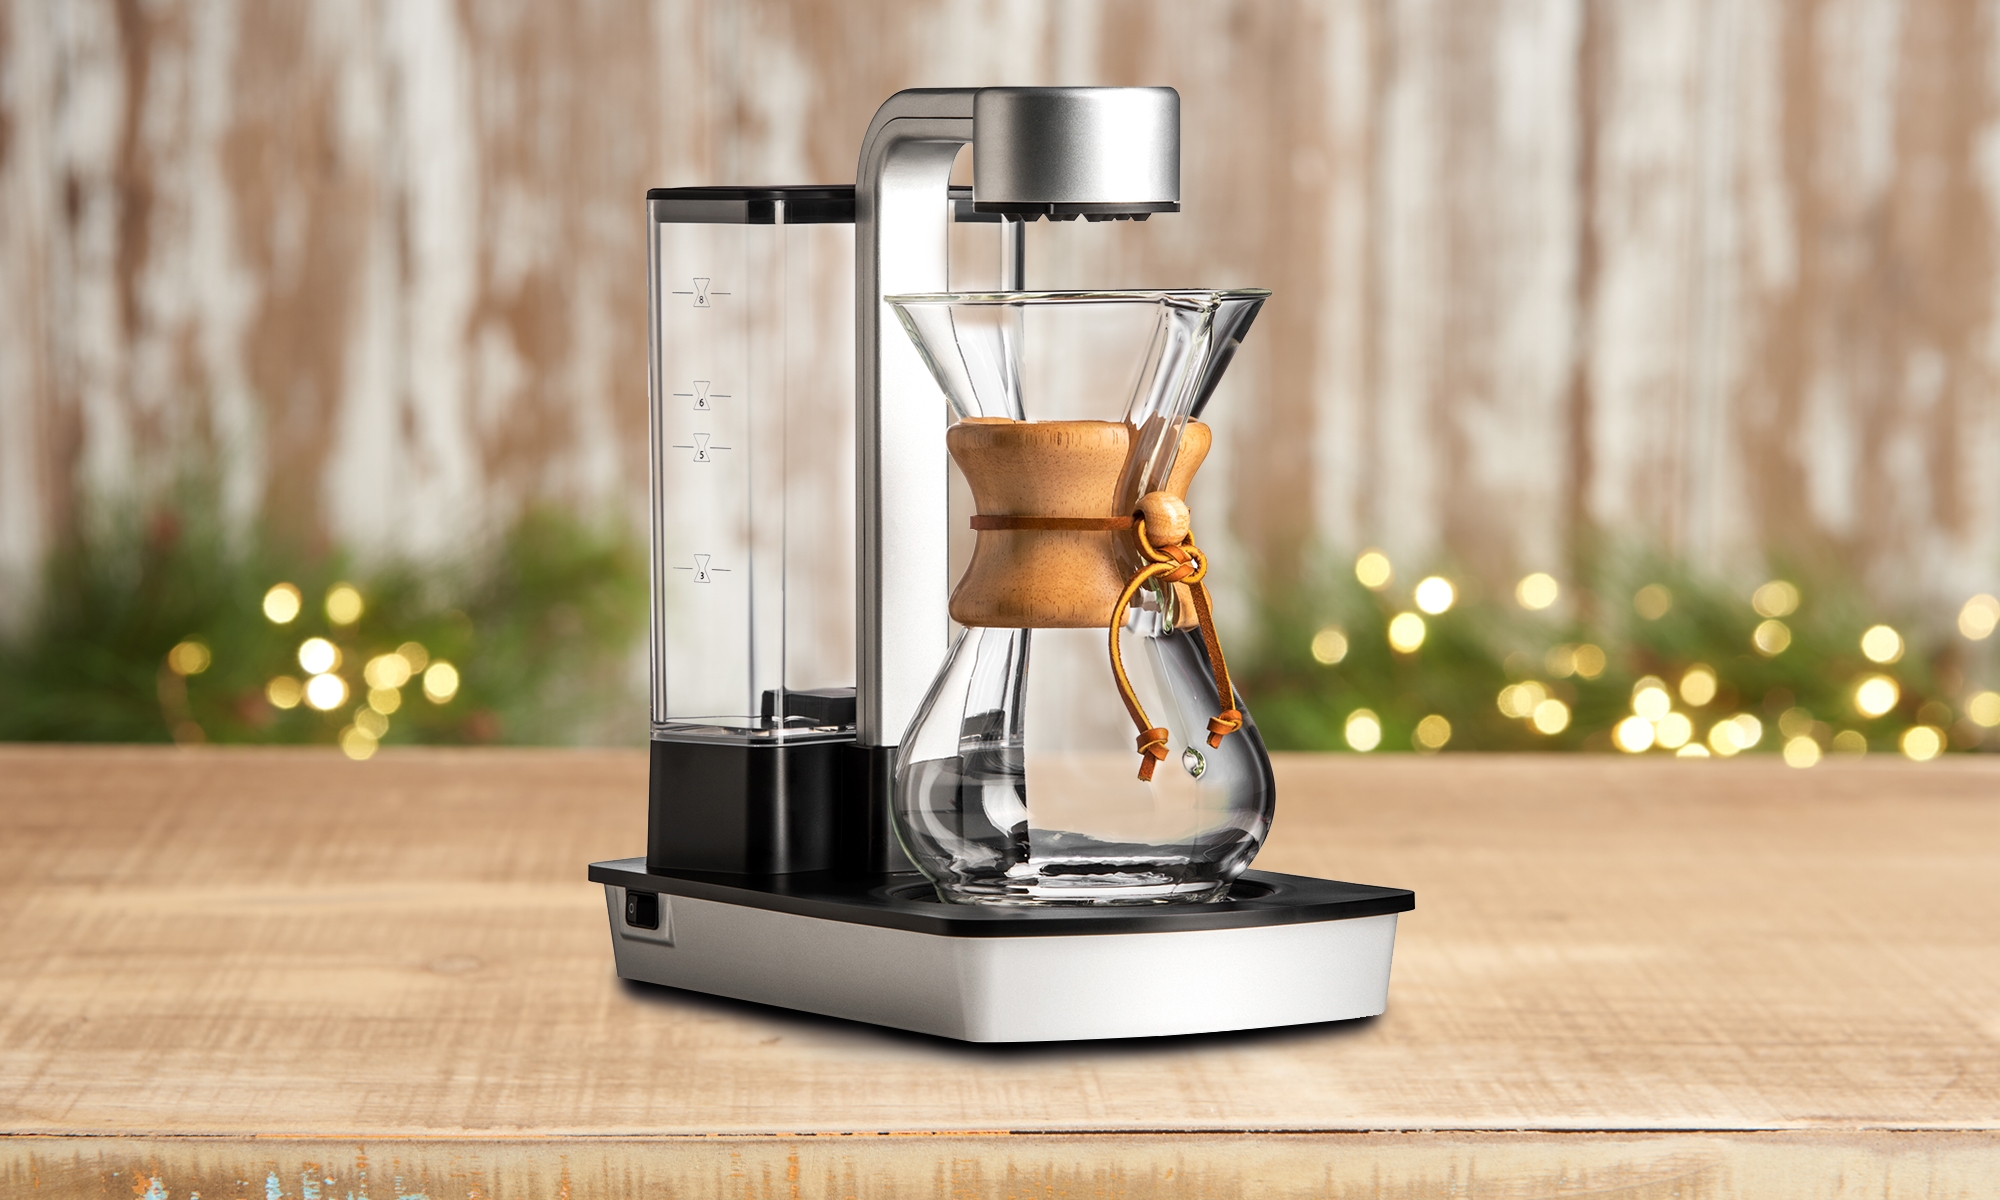 The best gifts for coffee lovers in 2022 | DeviceDaily.com